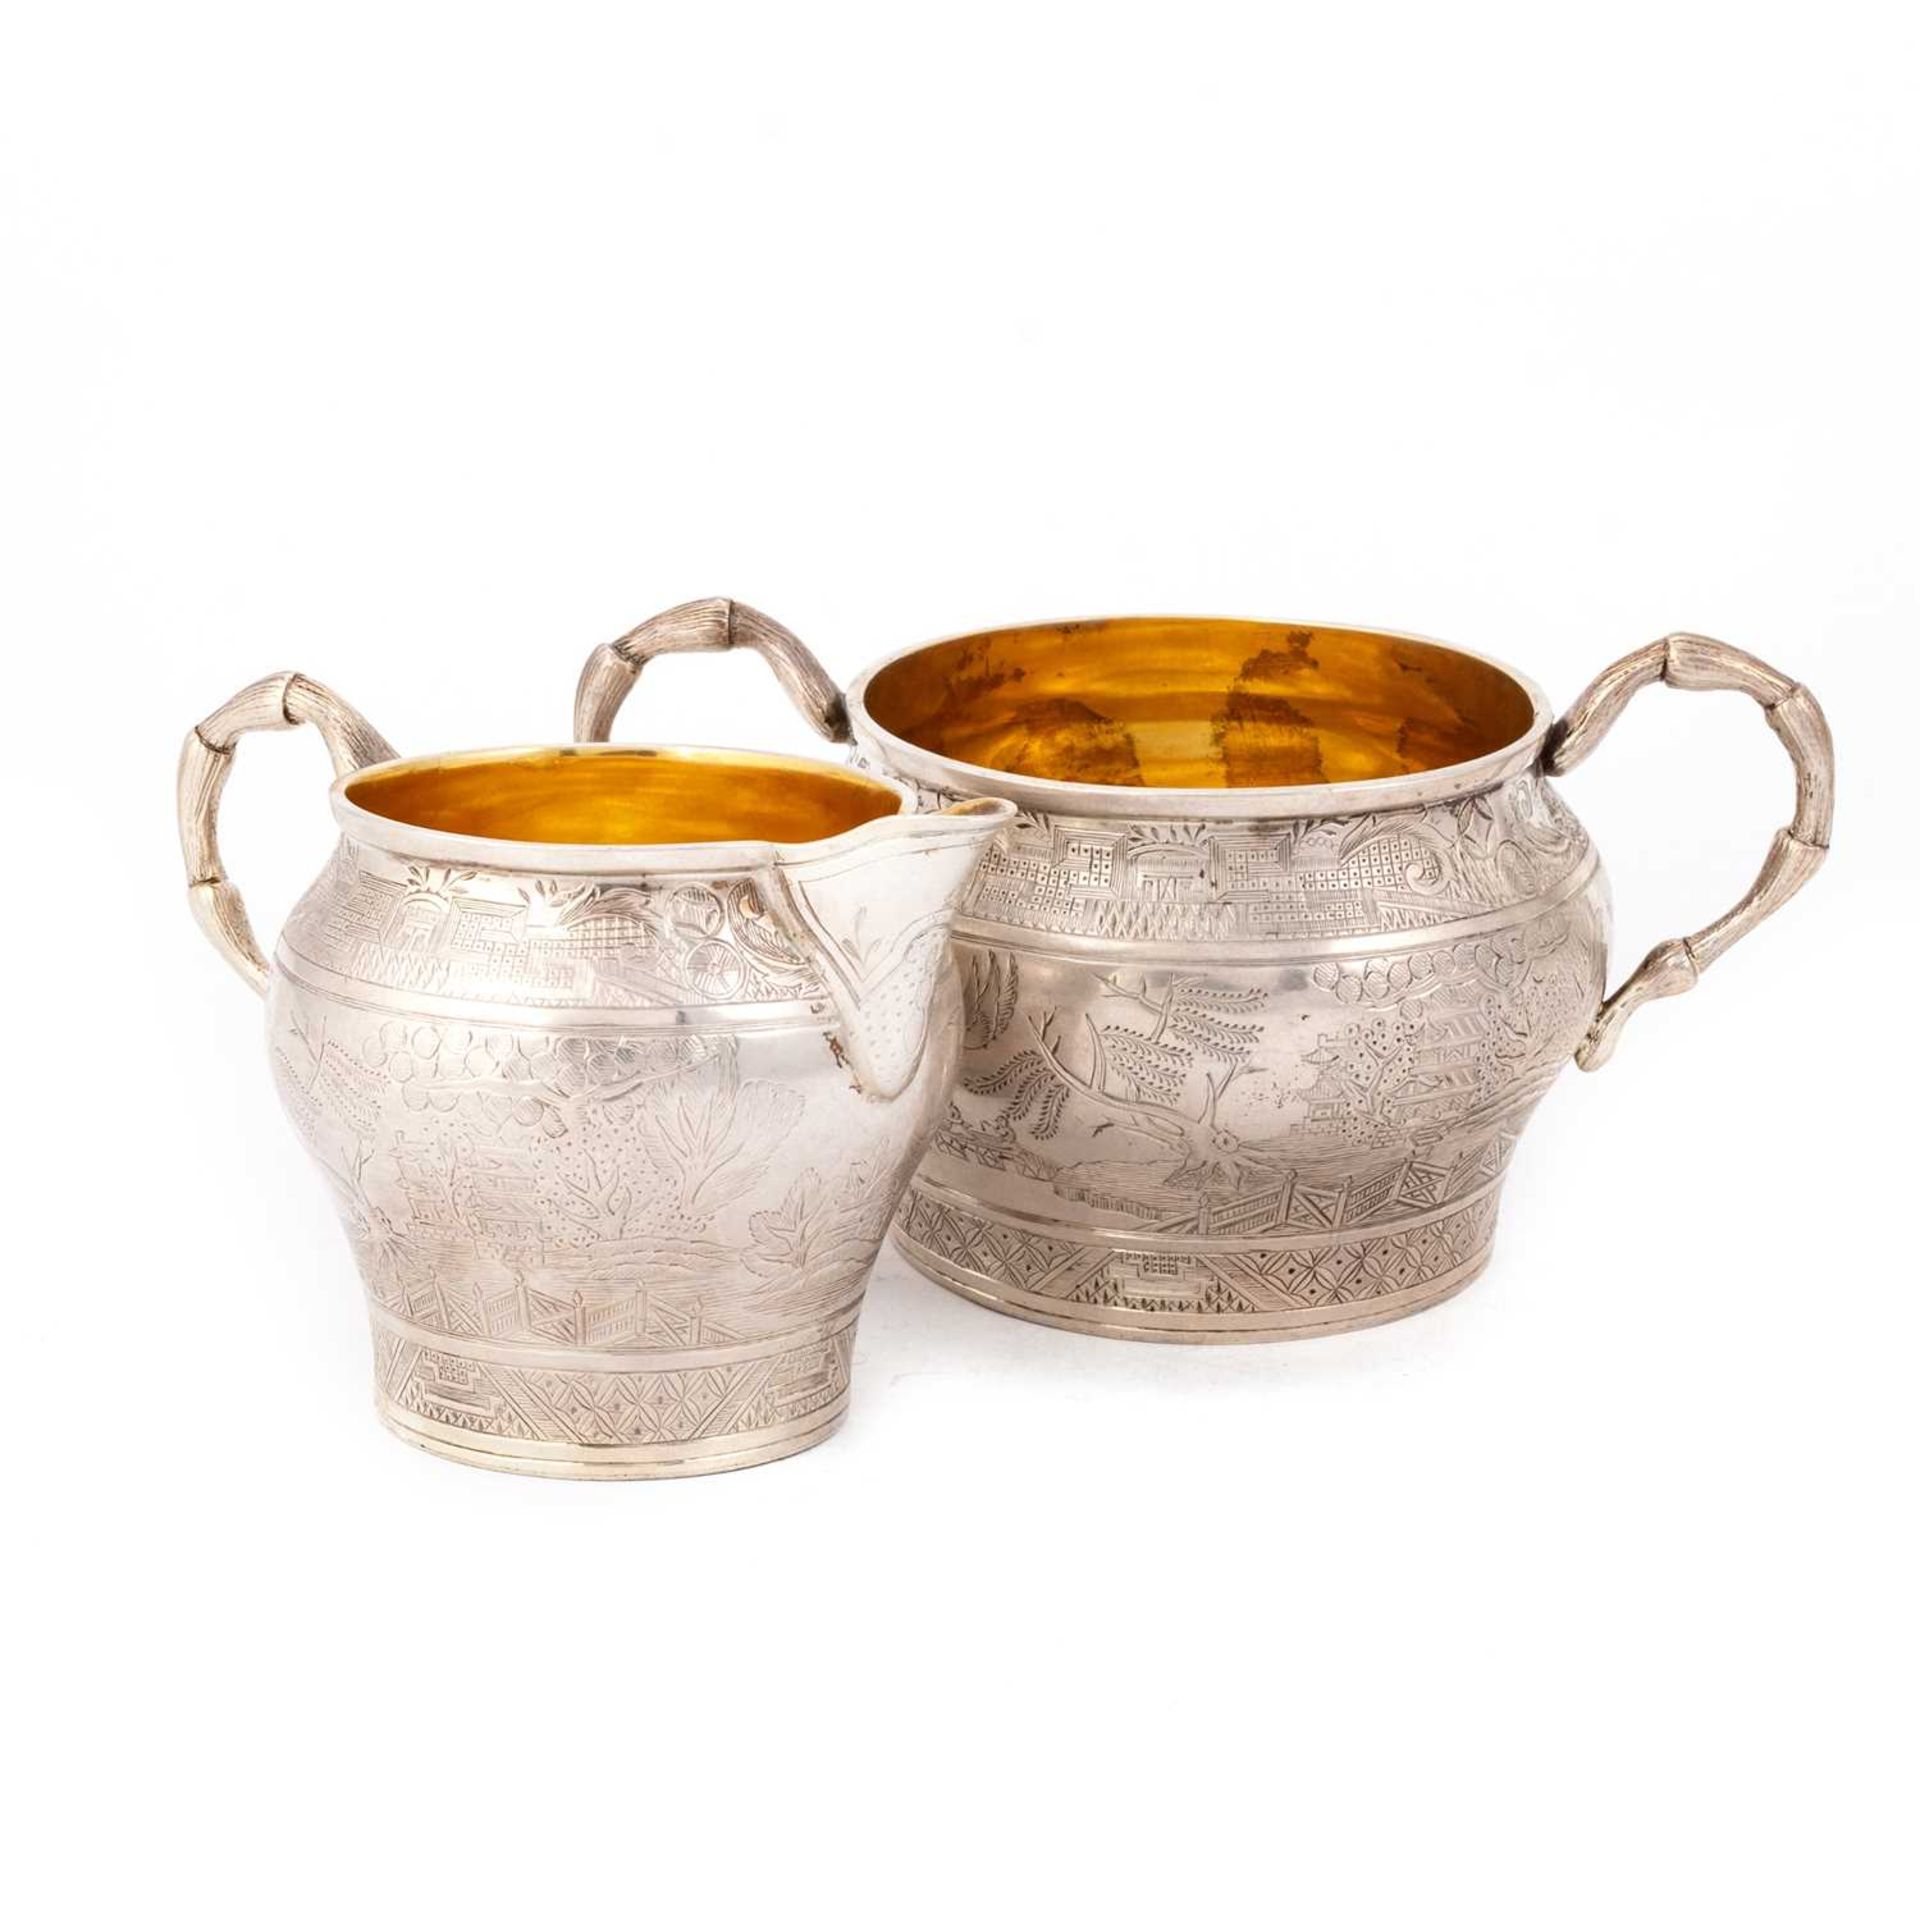 A VICTORIAN SILVER CHINOISERIE CREAM JUG AND TWO-HANDLED SUGAR BOWL